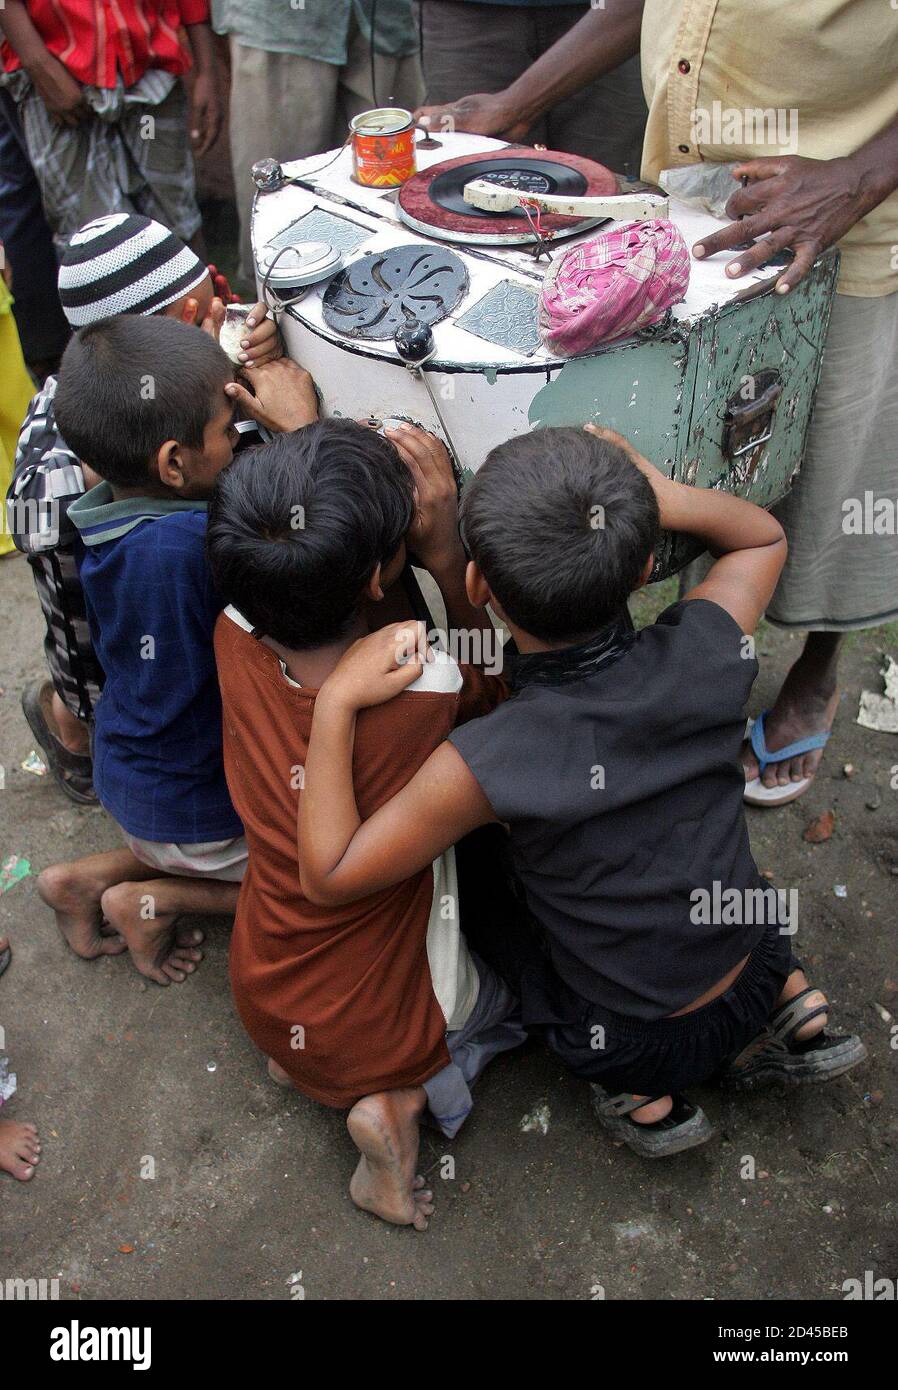 Indian children watch still clips from Bollywood films on a rag-tag  bioscope in the eastern Indian city of Calcutta July 5, 2005. The bioscope  is very popular in Indian villages where children